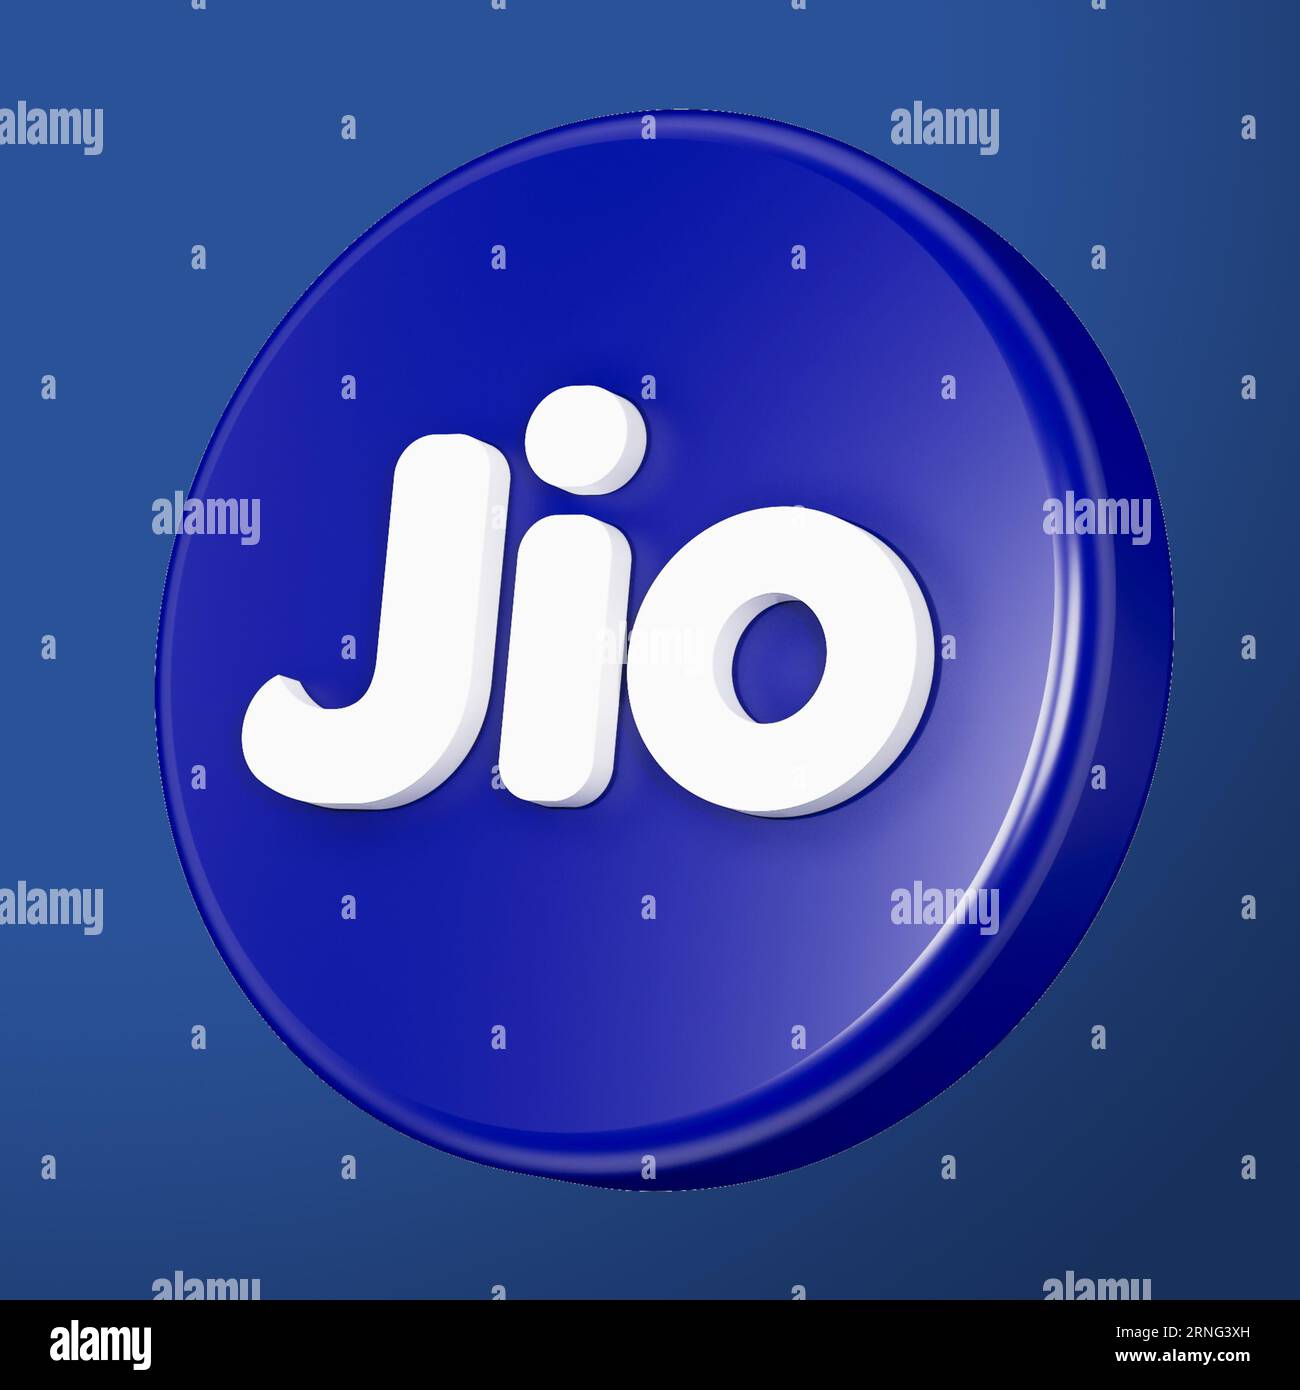 September 2, 2023. Reliance Jio Limited logo, Jio, is an